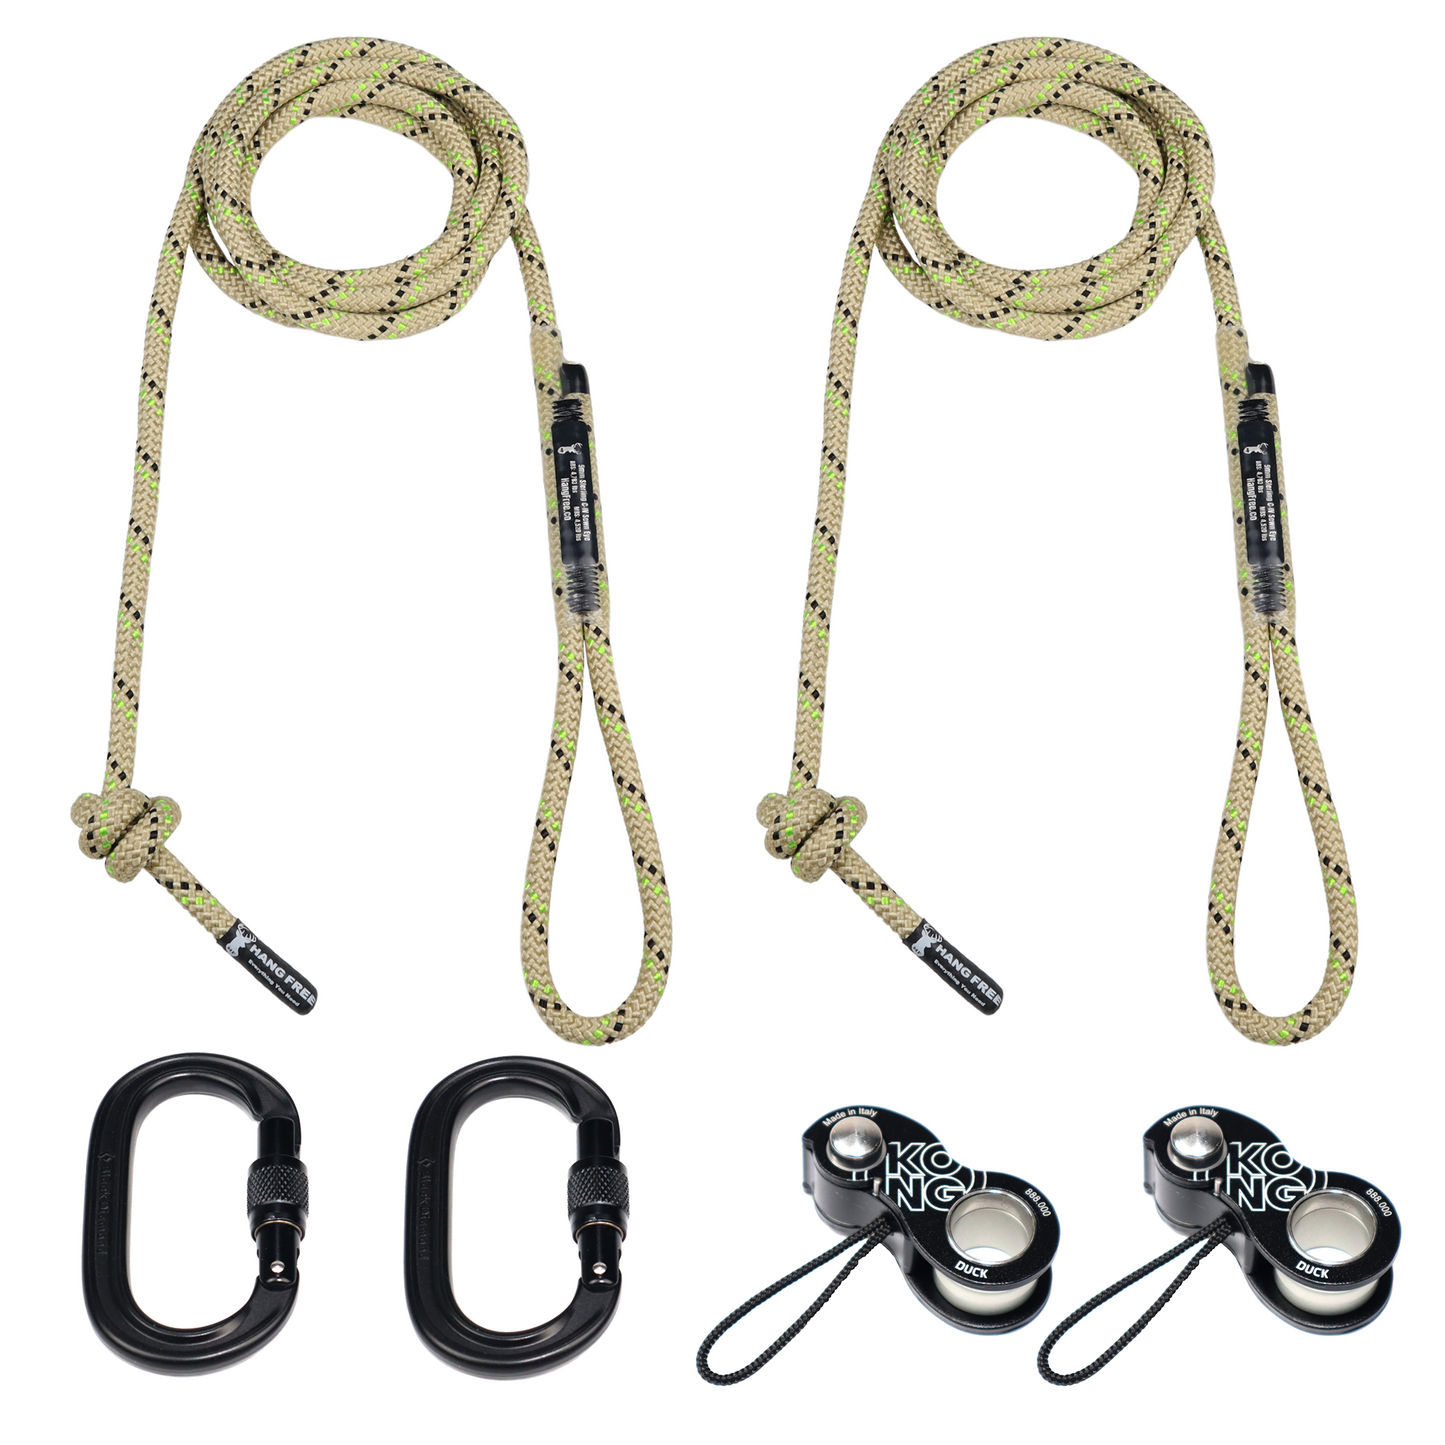 9mm Green C-IV Deluxe Sewn Tether & Lineman's Package with Carabiners